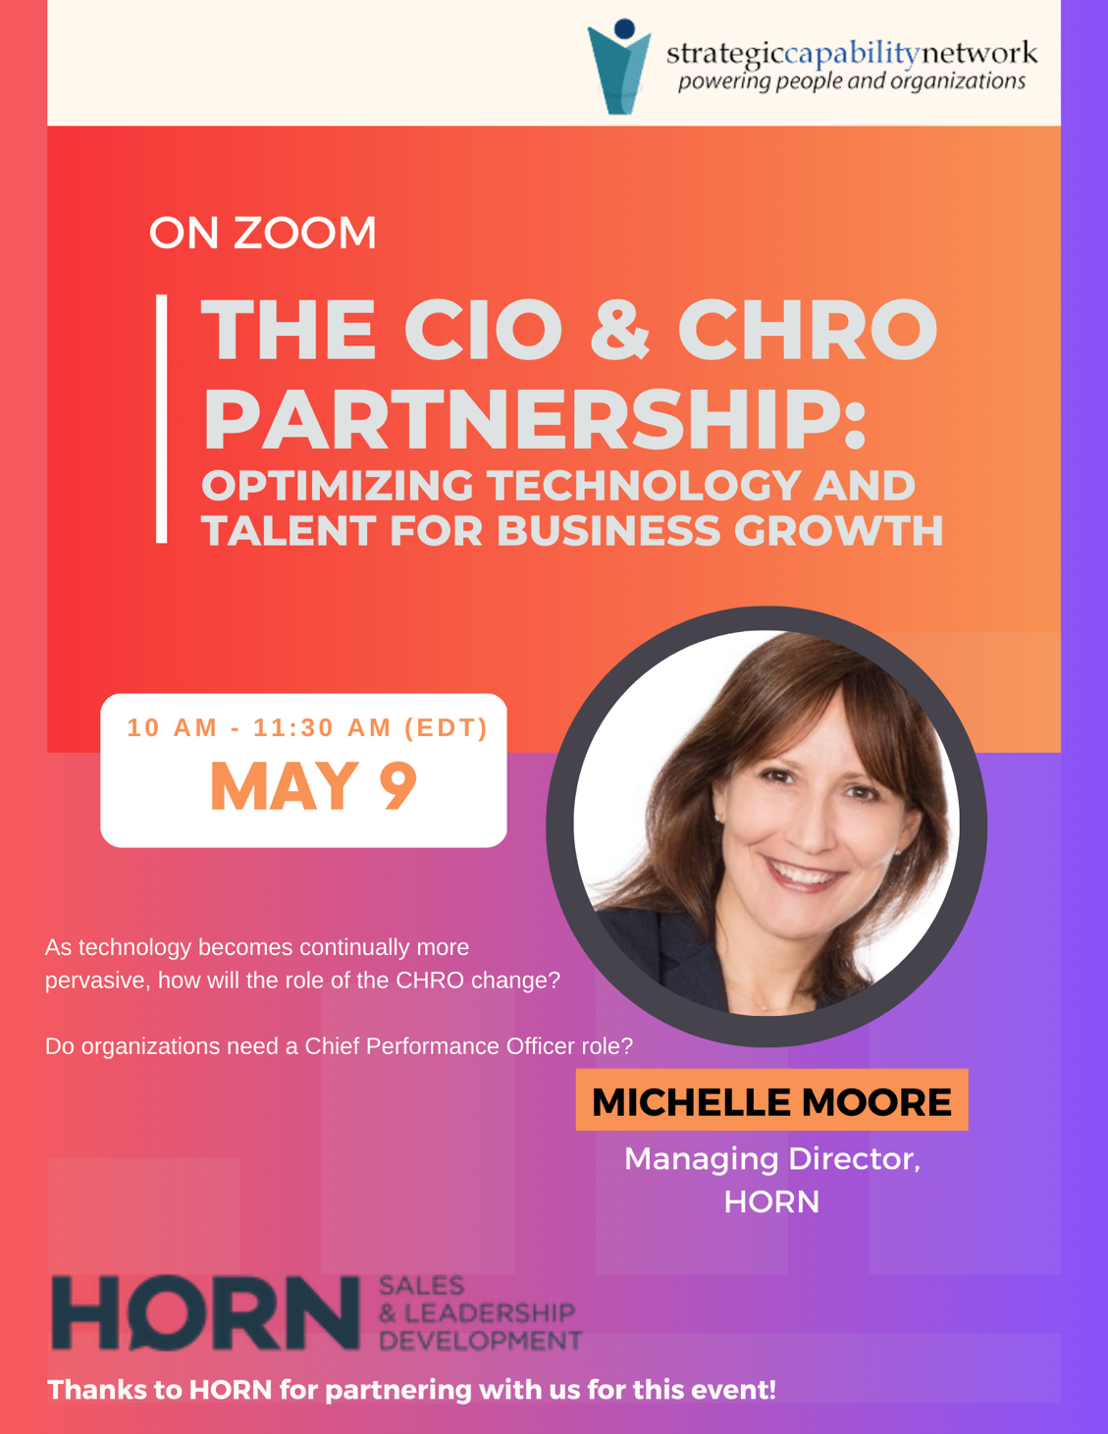 The CIO and CHRO Partnership: Optimizing Technology and Talent for Business Growth being held on 9 May 2023 - 10:00 AM to 11:30 AM Eastern Time